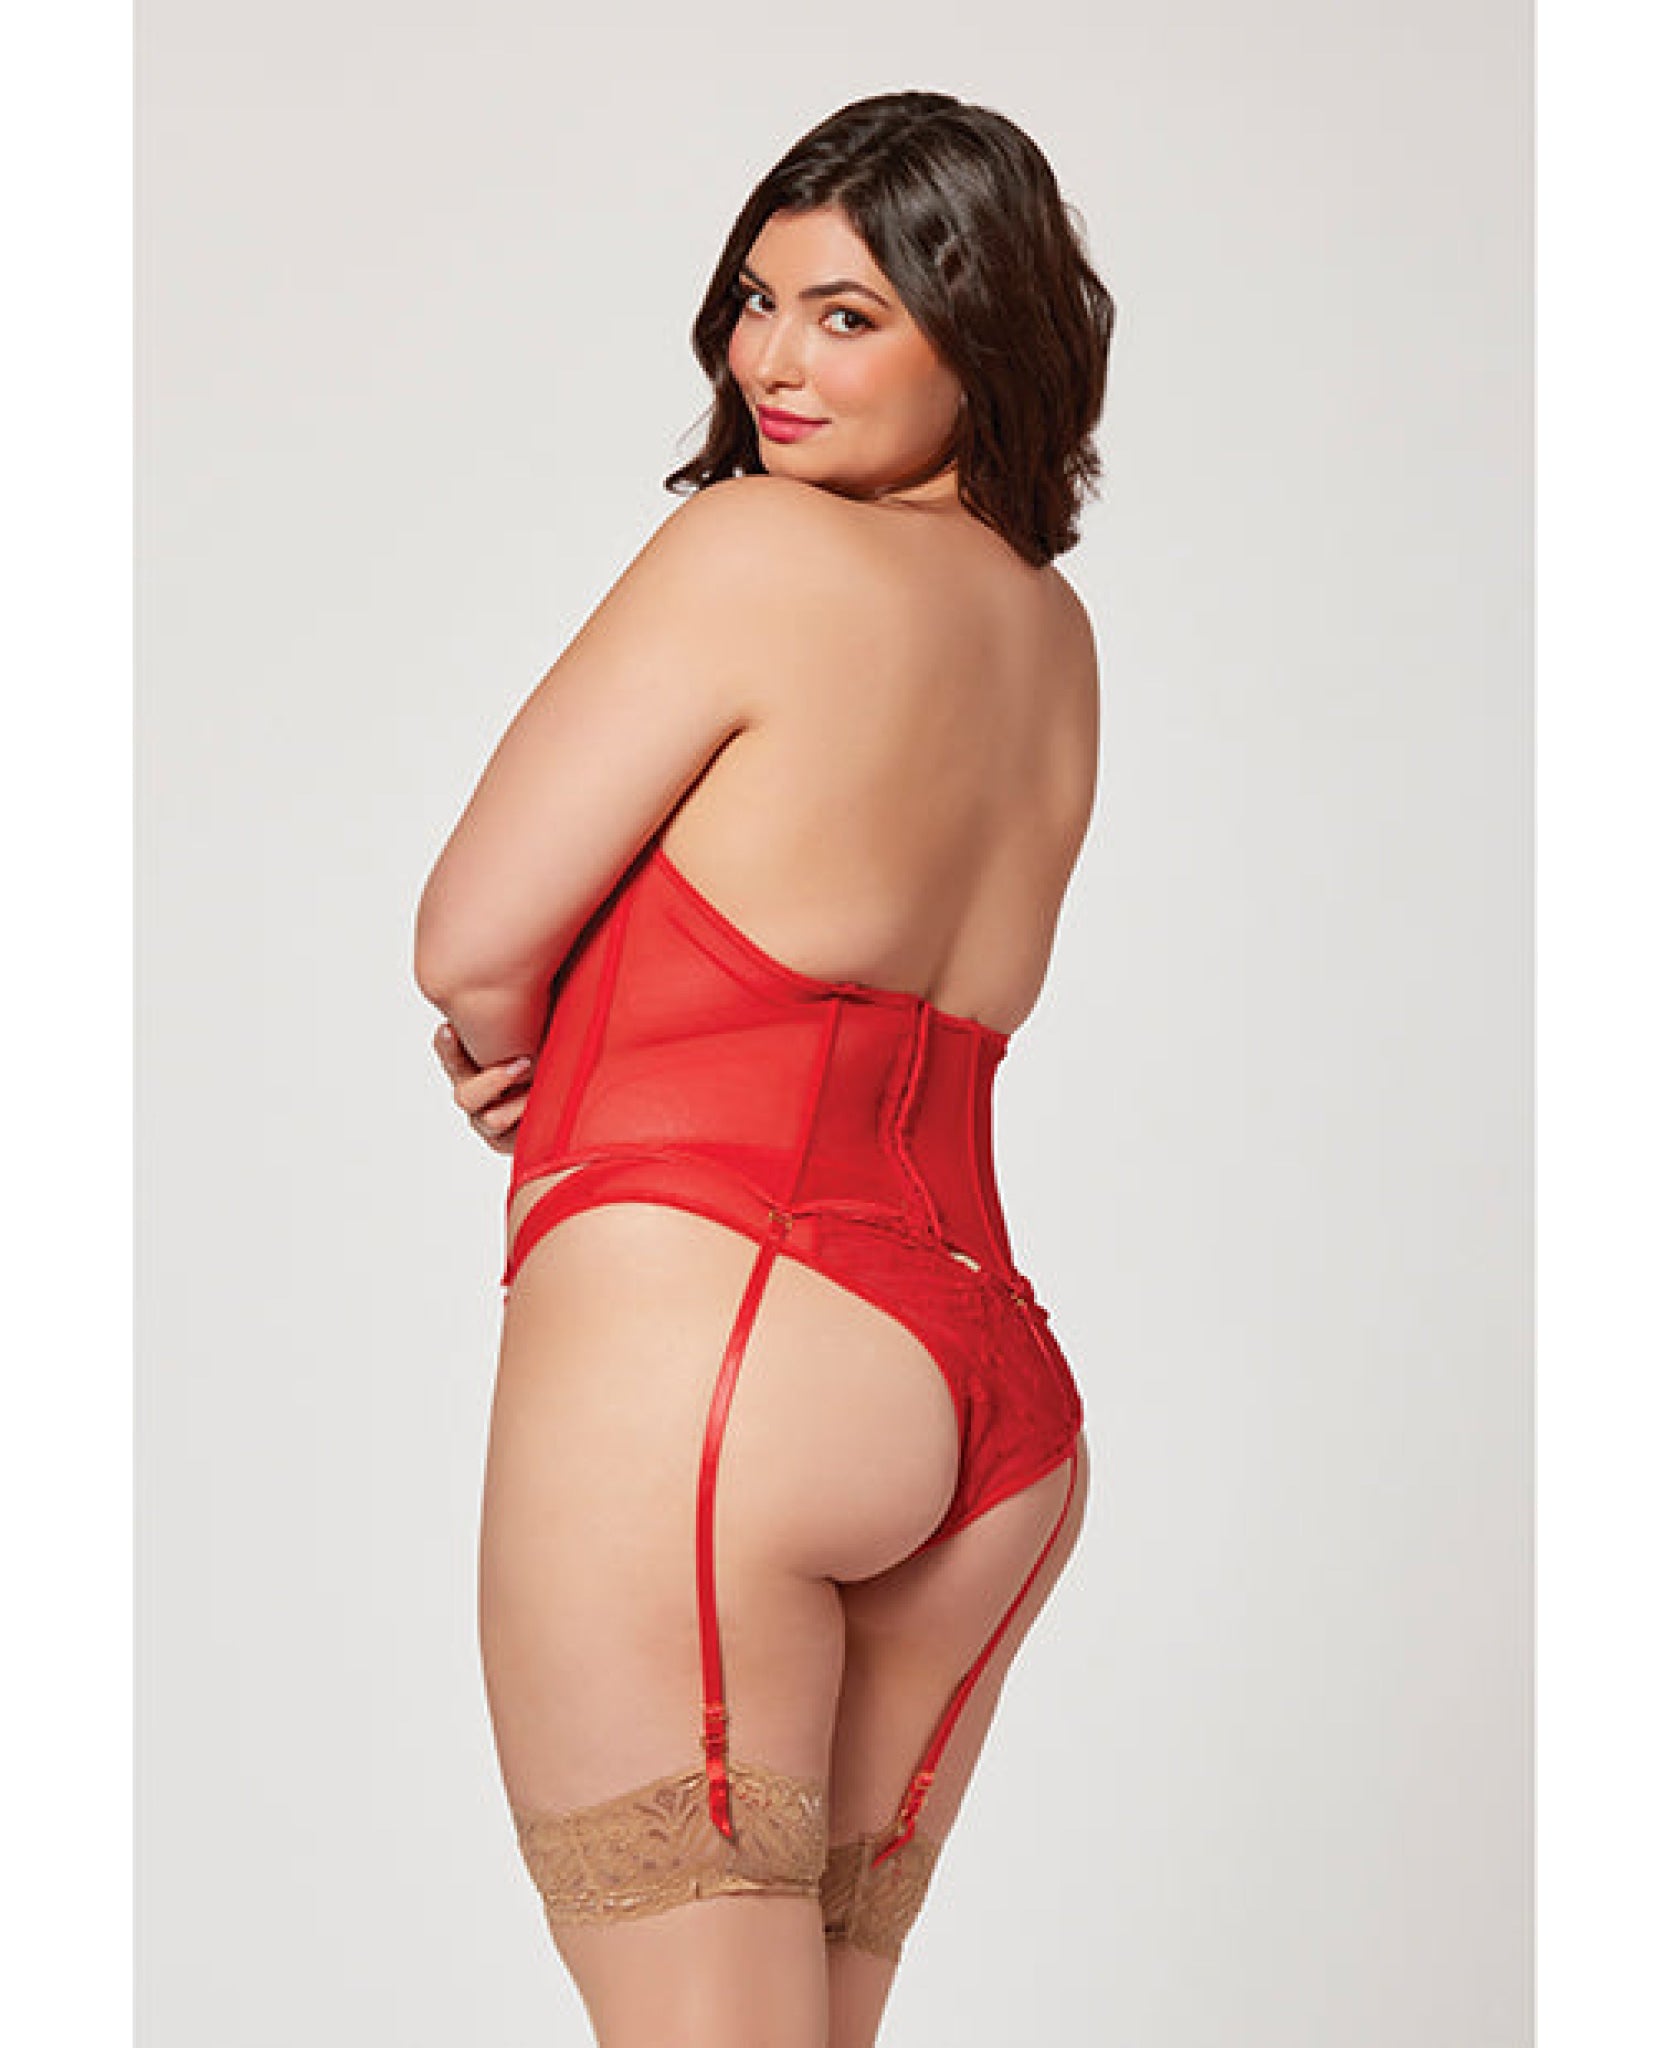 Valentines Heart Embroidered Mesh Bustier & Panty Red Seven 'til Midnight Costume